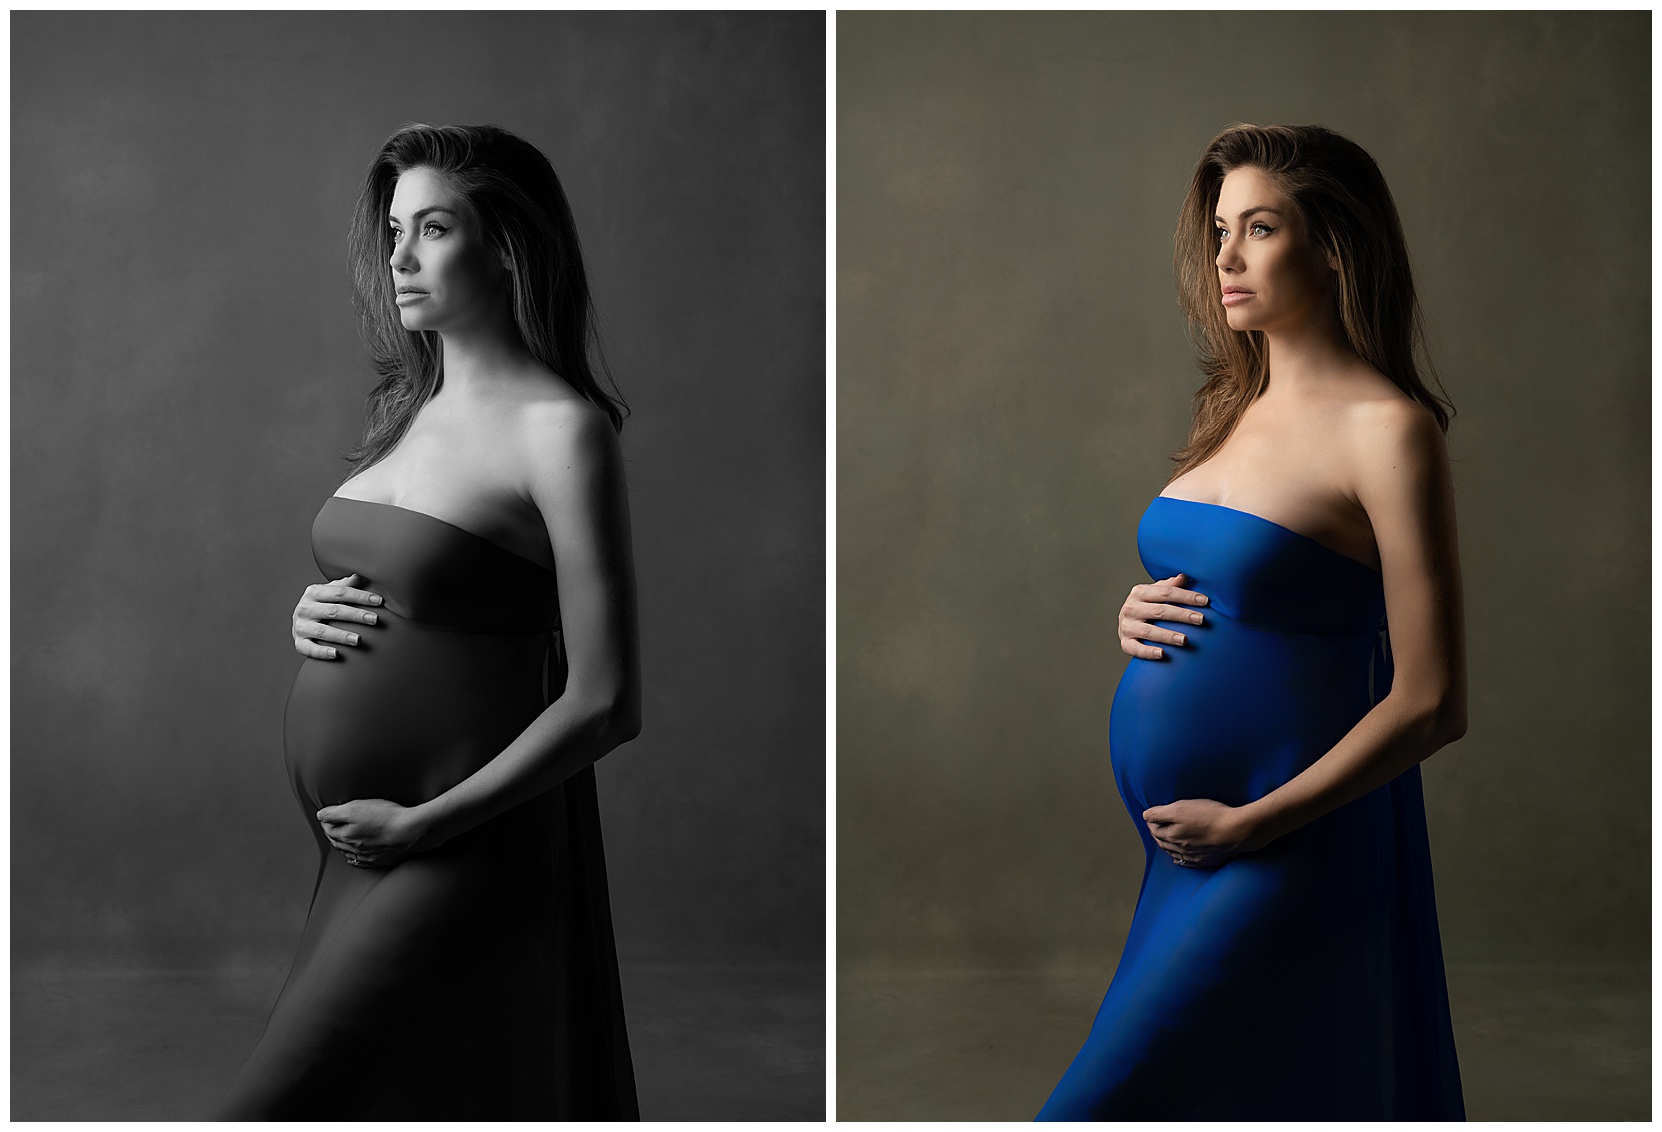 A montage of two photos featuring a white woman with sandy brown hair in a blue gown cradling her baby bump. Photo on the left is in black and white, photo on the right is in color.